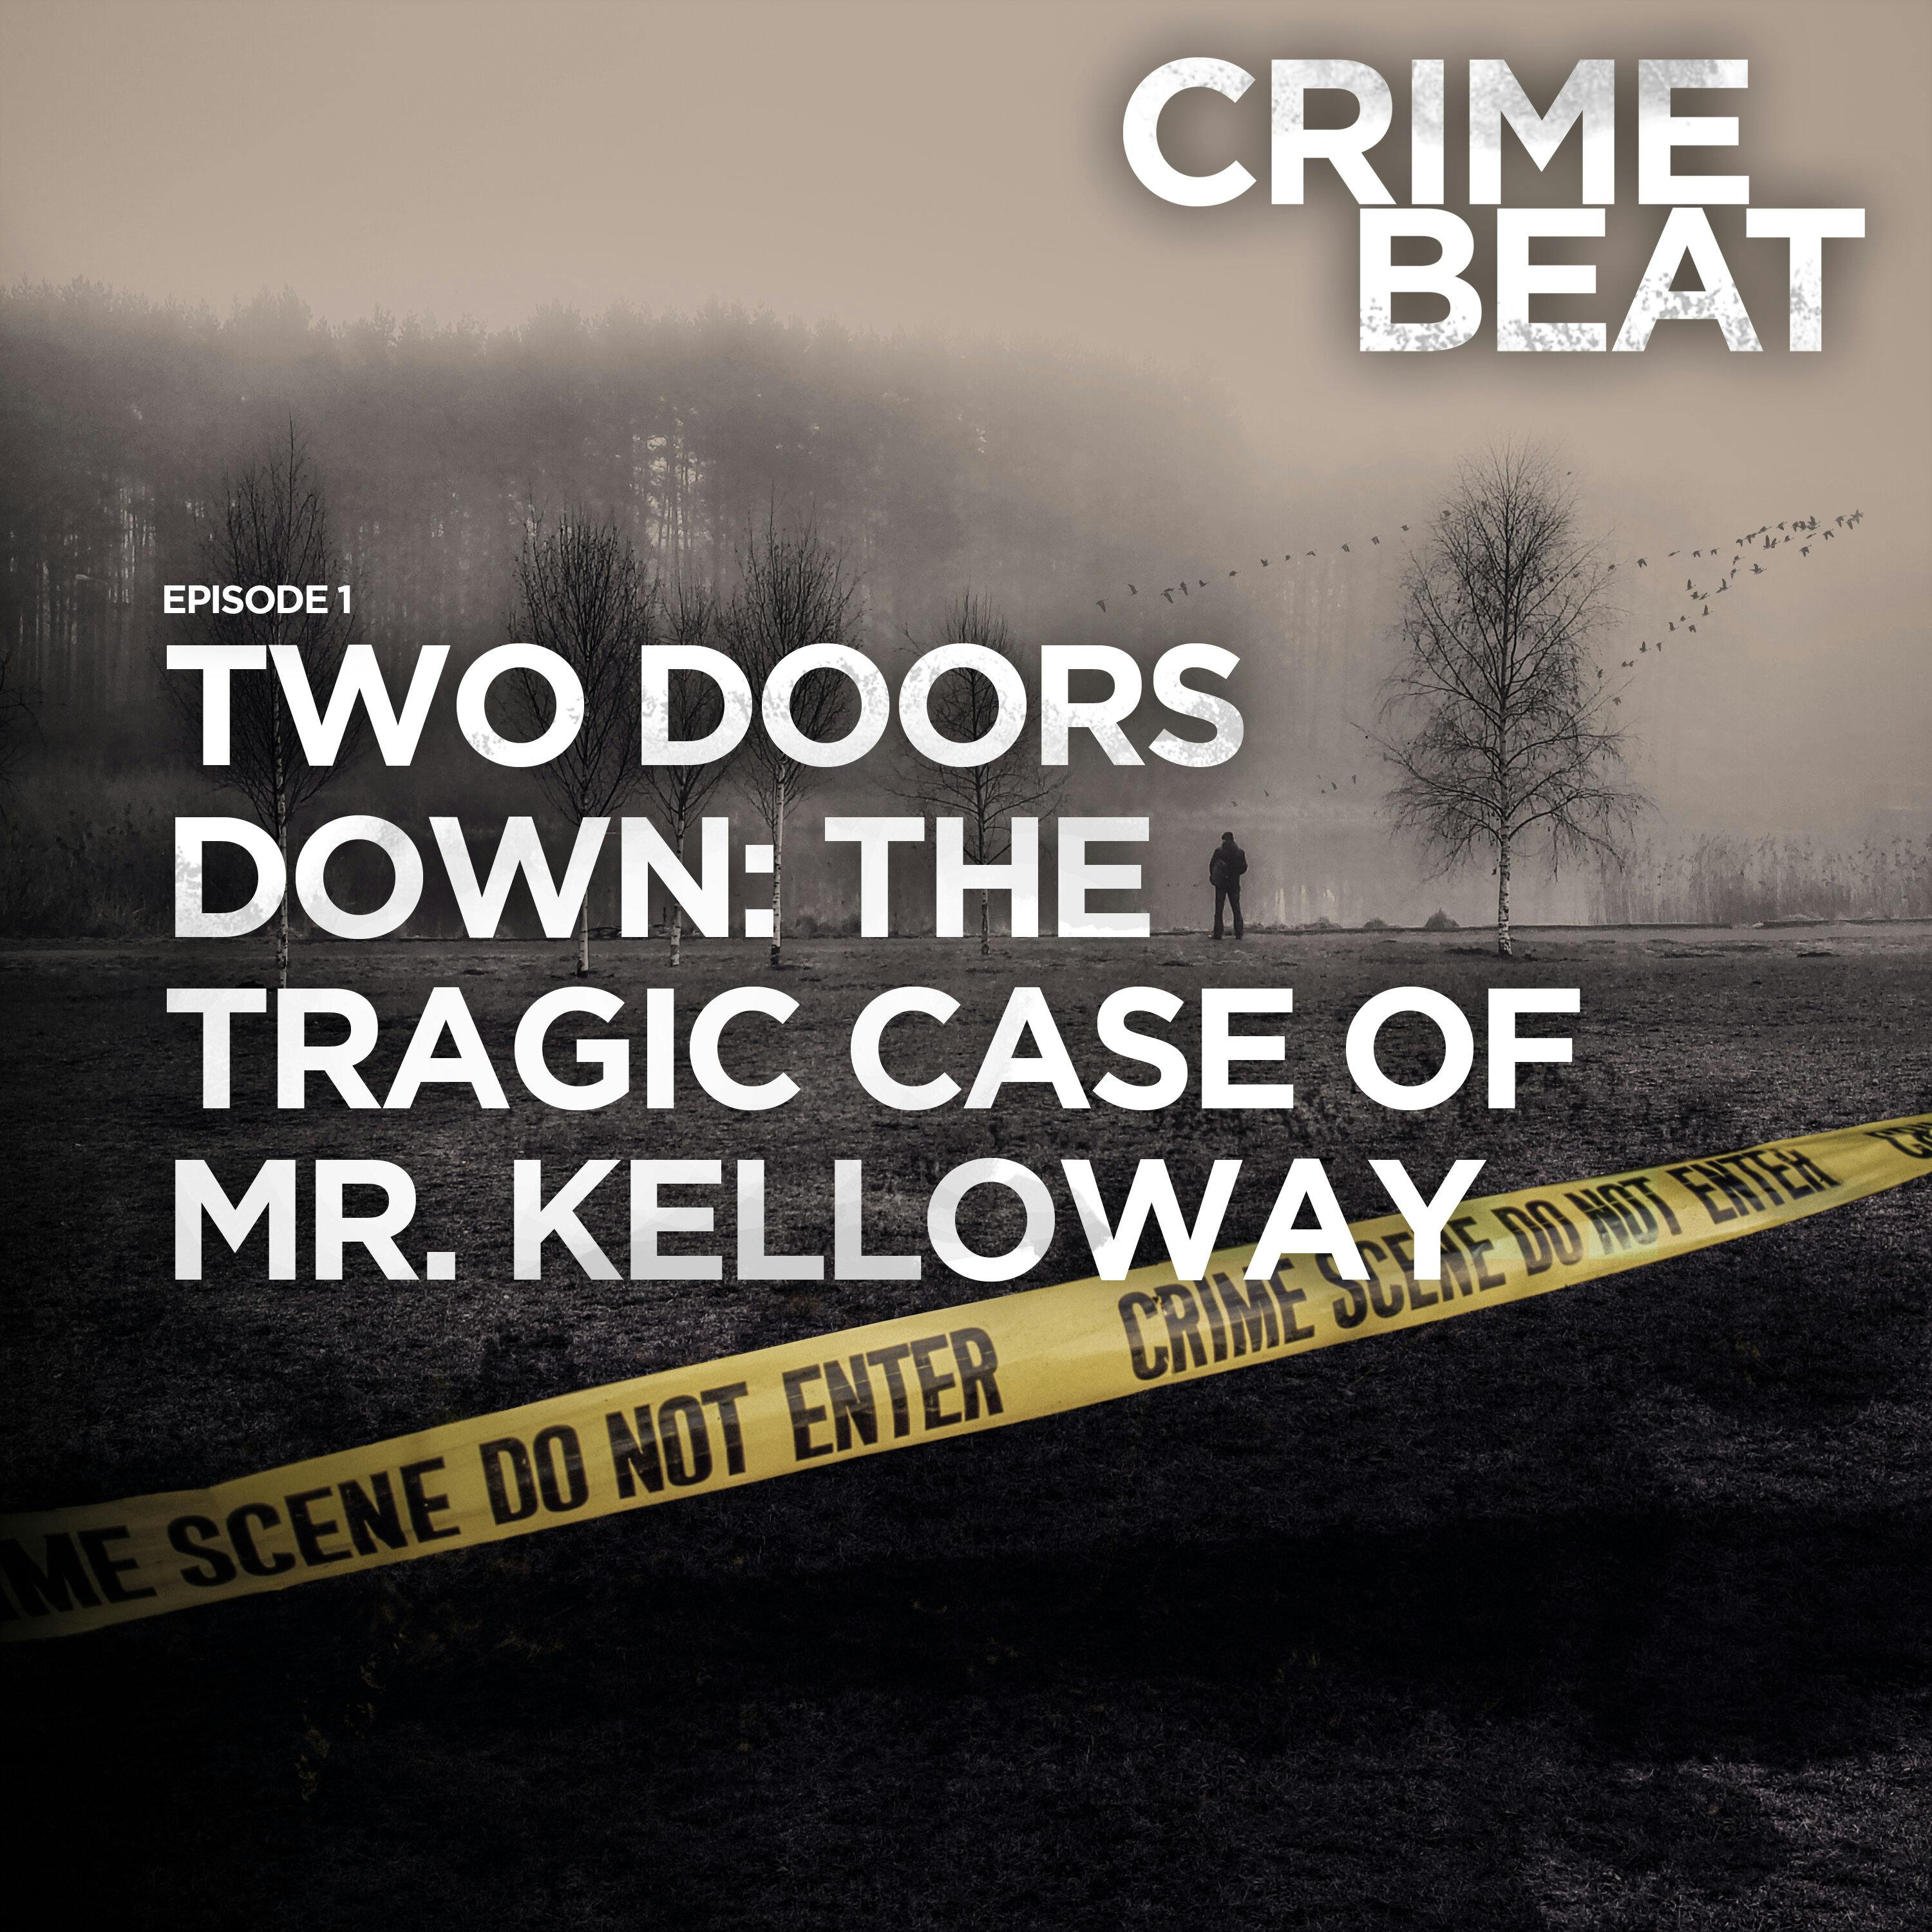 Two doors down:  the tragic case of Mr. Kelloway |1